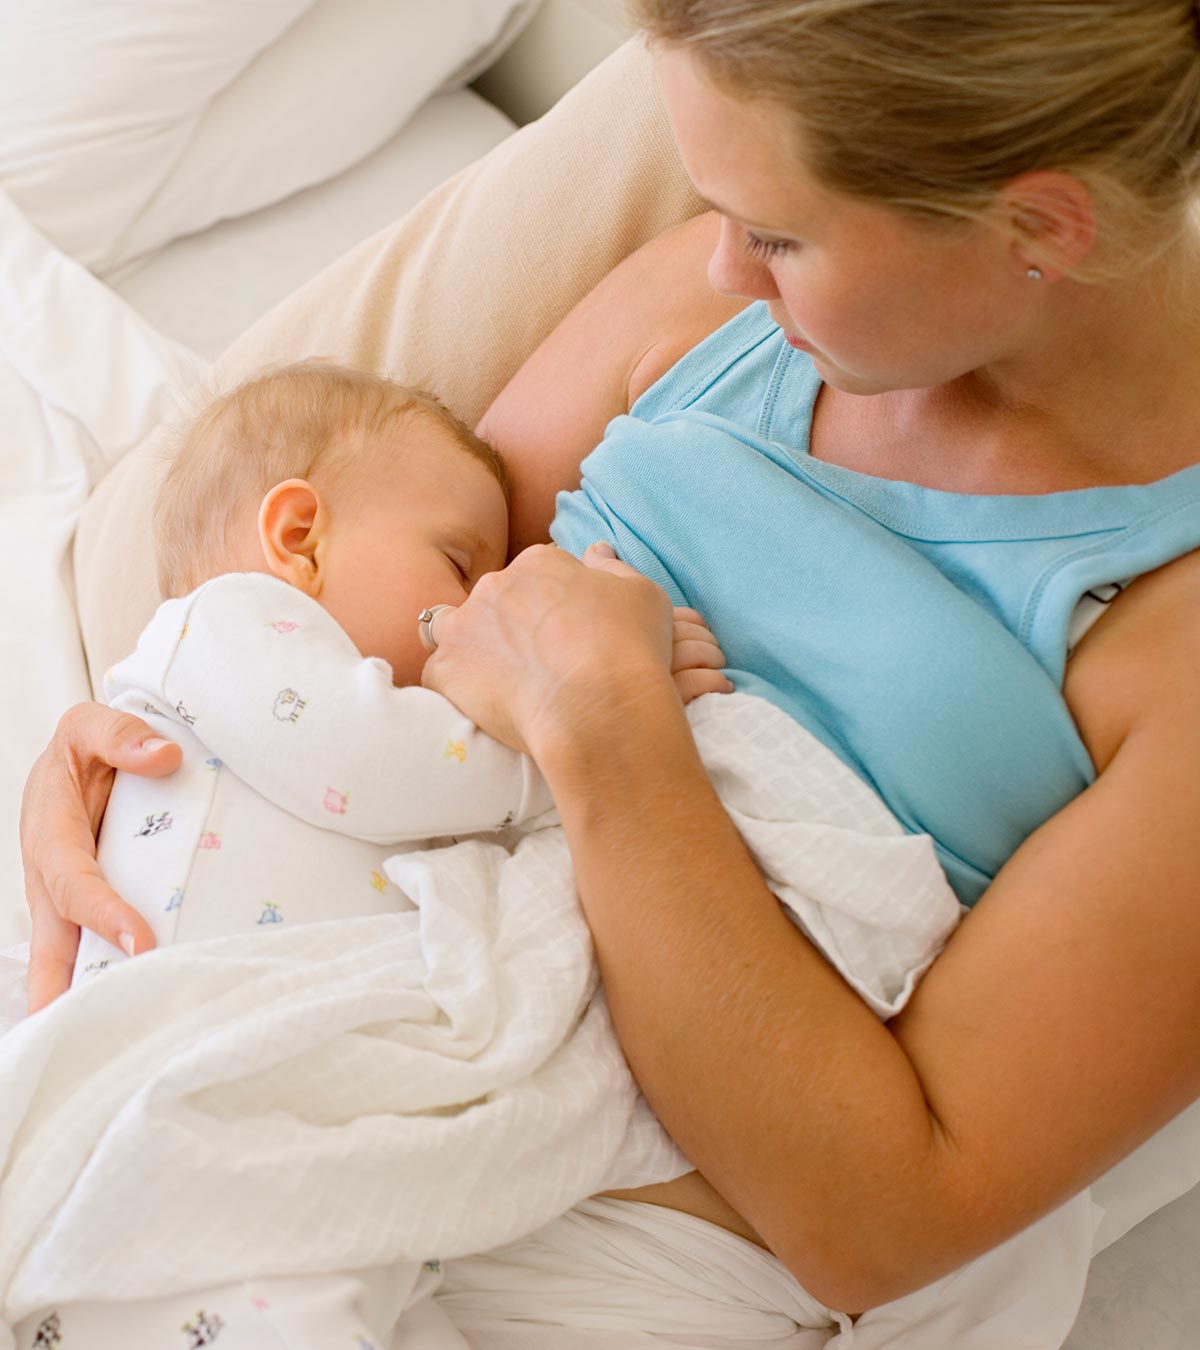 Breastfeeding From One Breast: Causes, Side Effects And Tips